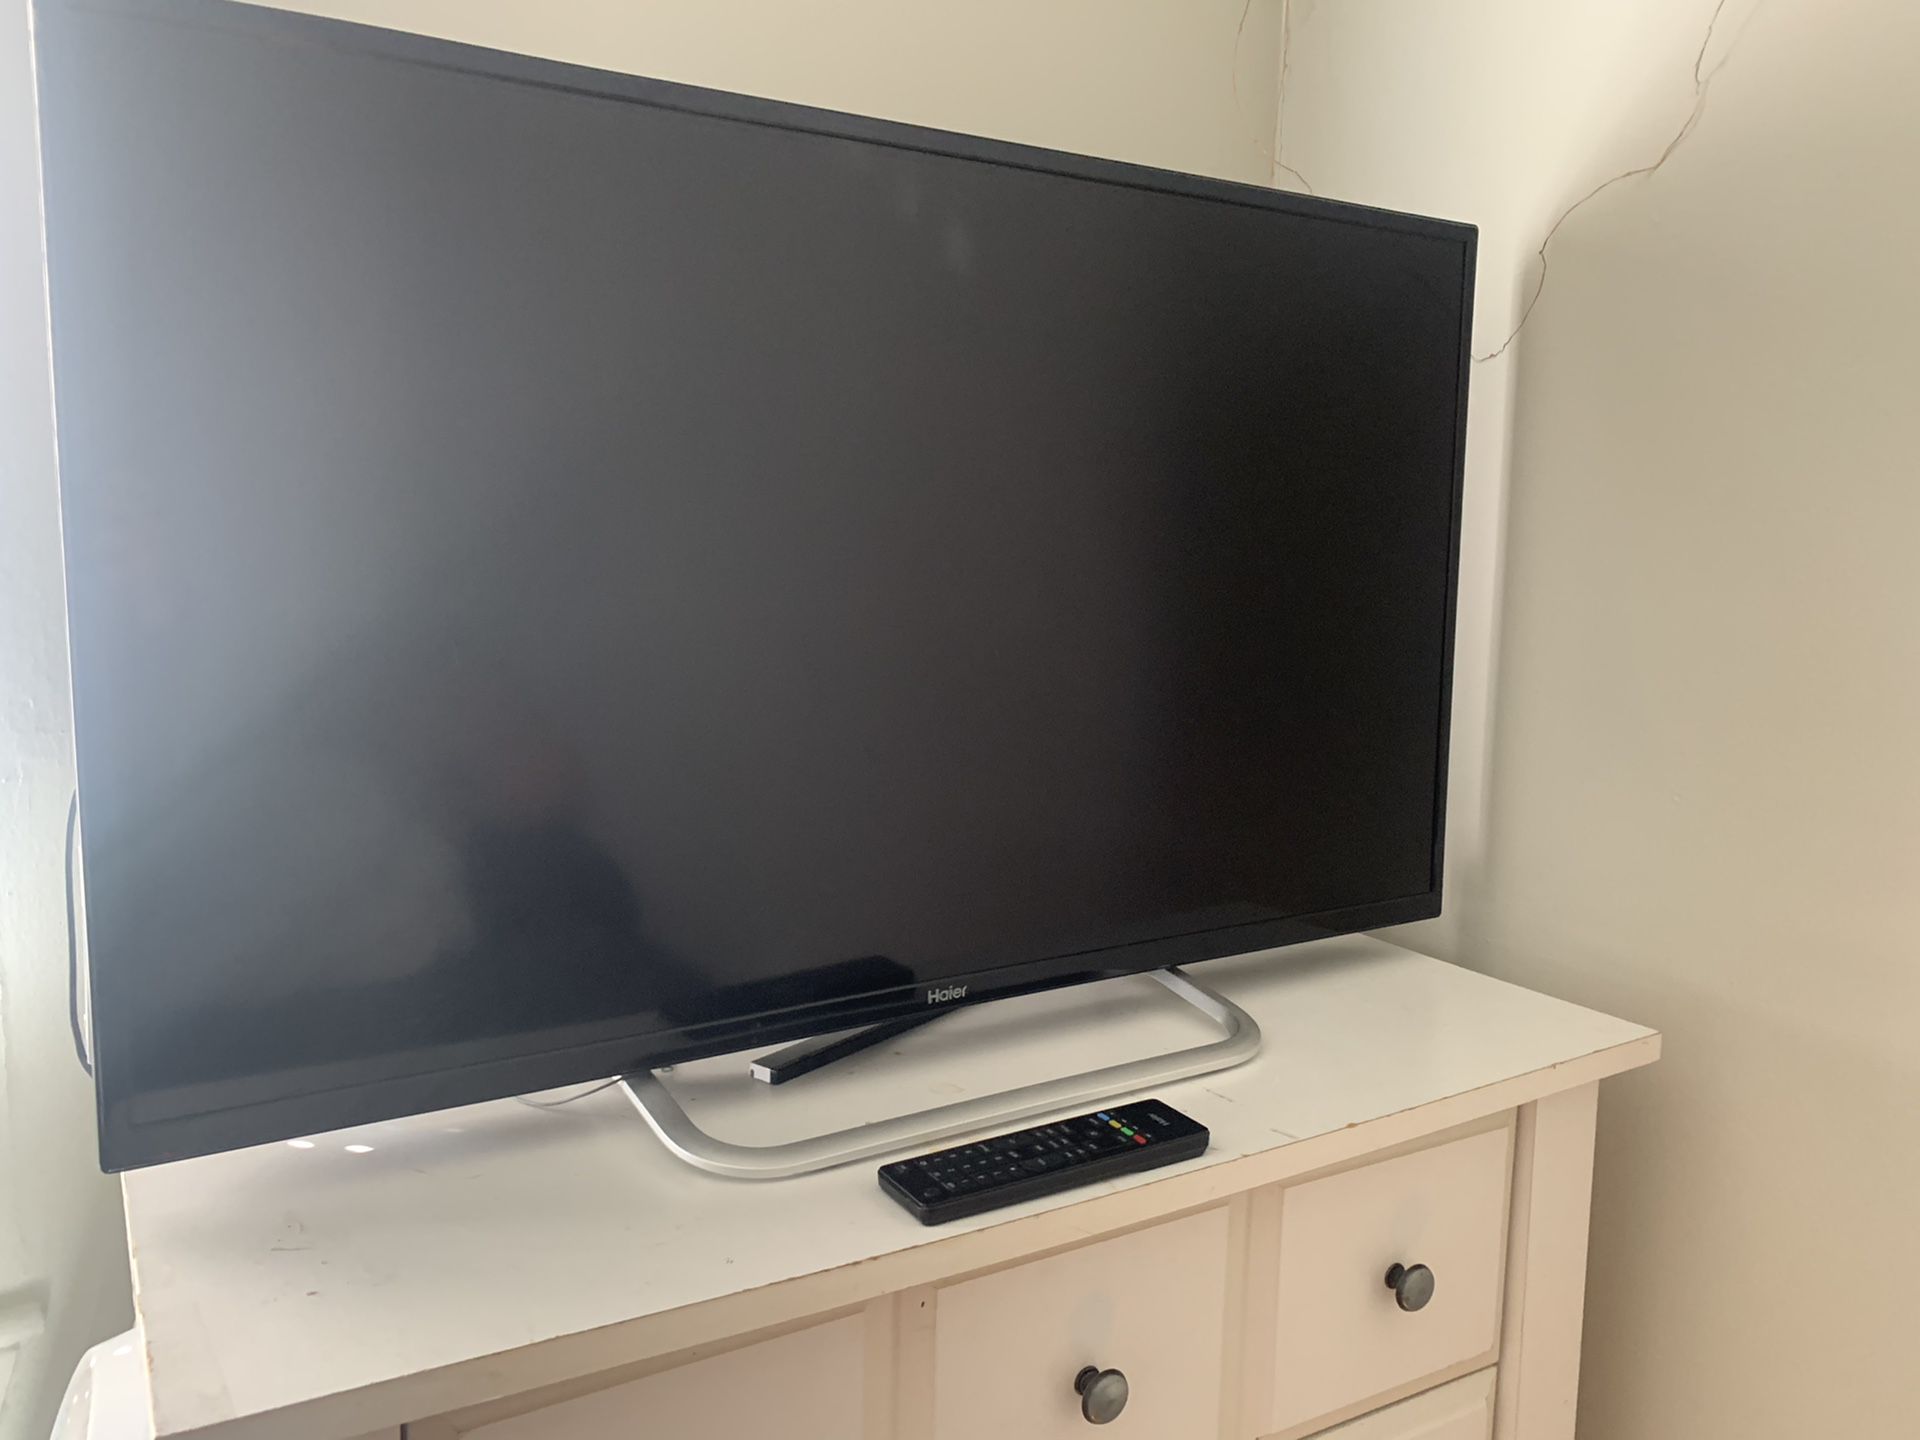 TWO TVS FOR $175